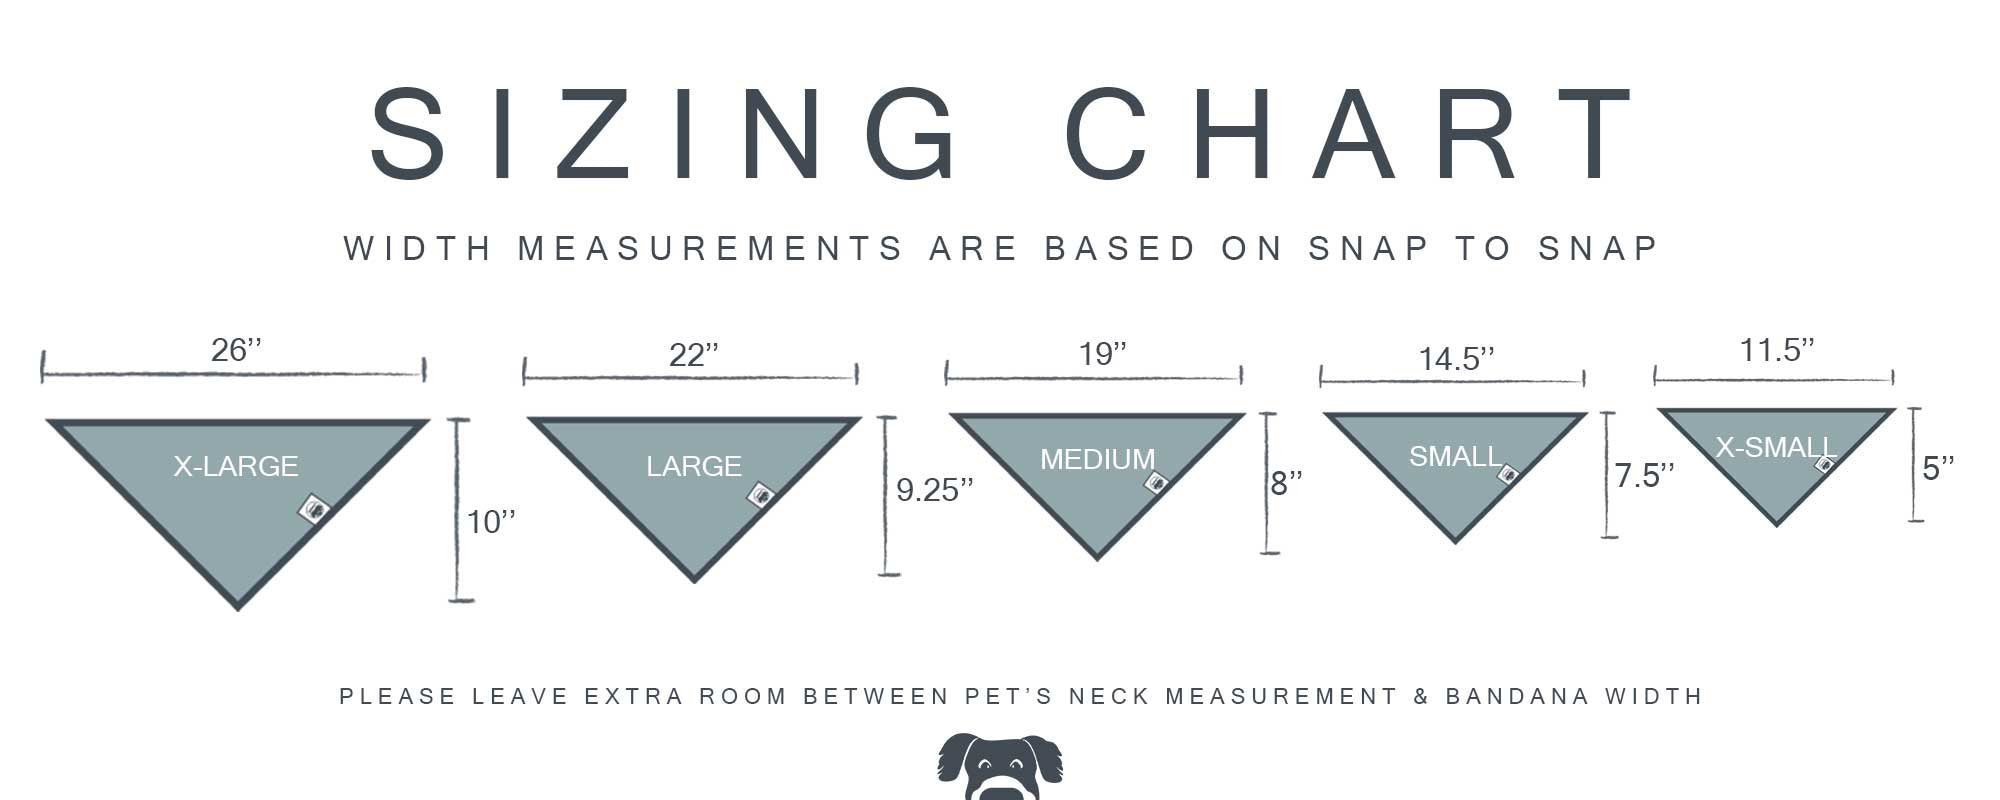 Bandana sizing chart. Width measurements are based on snap to snap. From left to right, x-large is 26 inches across and 10 inches deep, large is 22 inches across and 9.25 inches deep, medium is 19 inches across and 8 inches deep, small is 14.5 inches across and 7.5 inches deep, and x-small is 11.5 inches across and 5 inches deep. Please leave extra room between pet's neck measurement and bandana width.